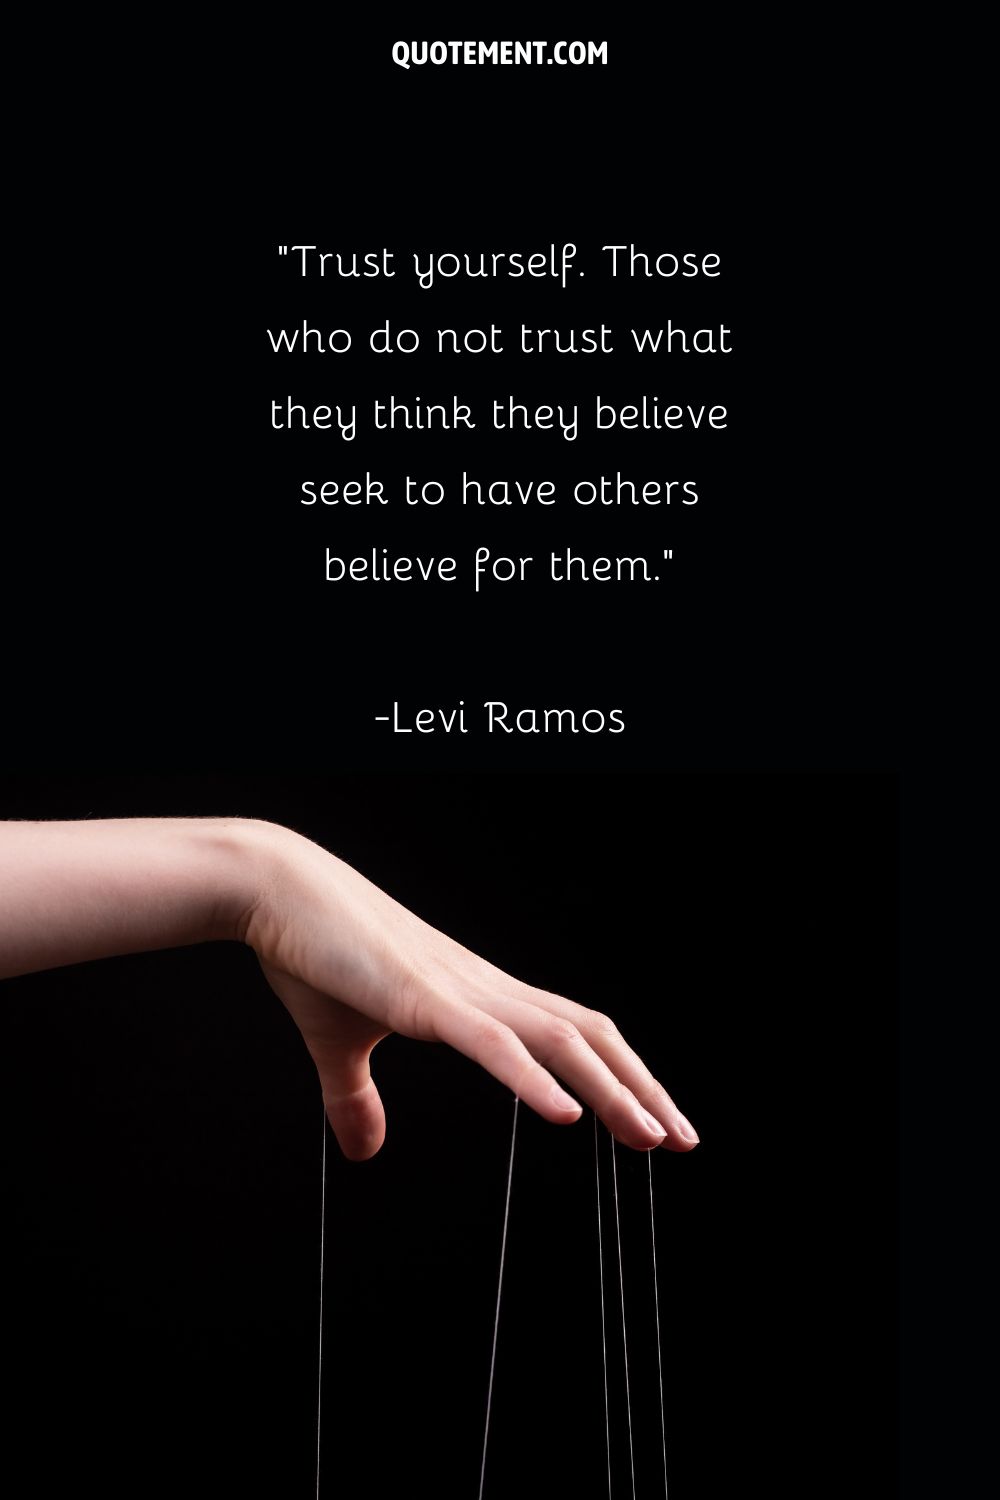 hand with strings image representing quote on trusting yourself